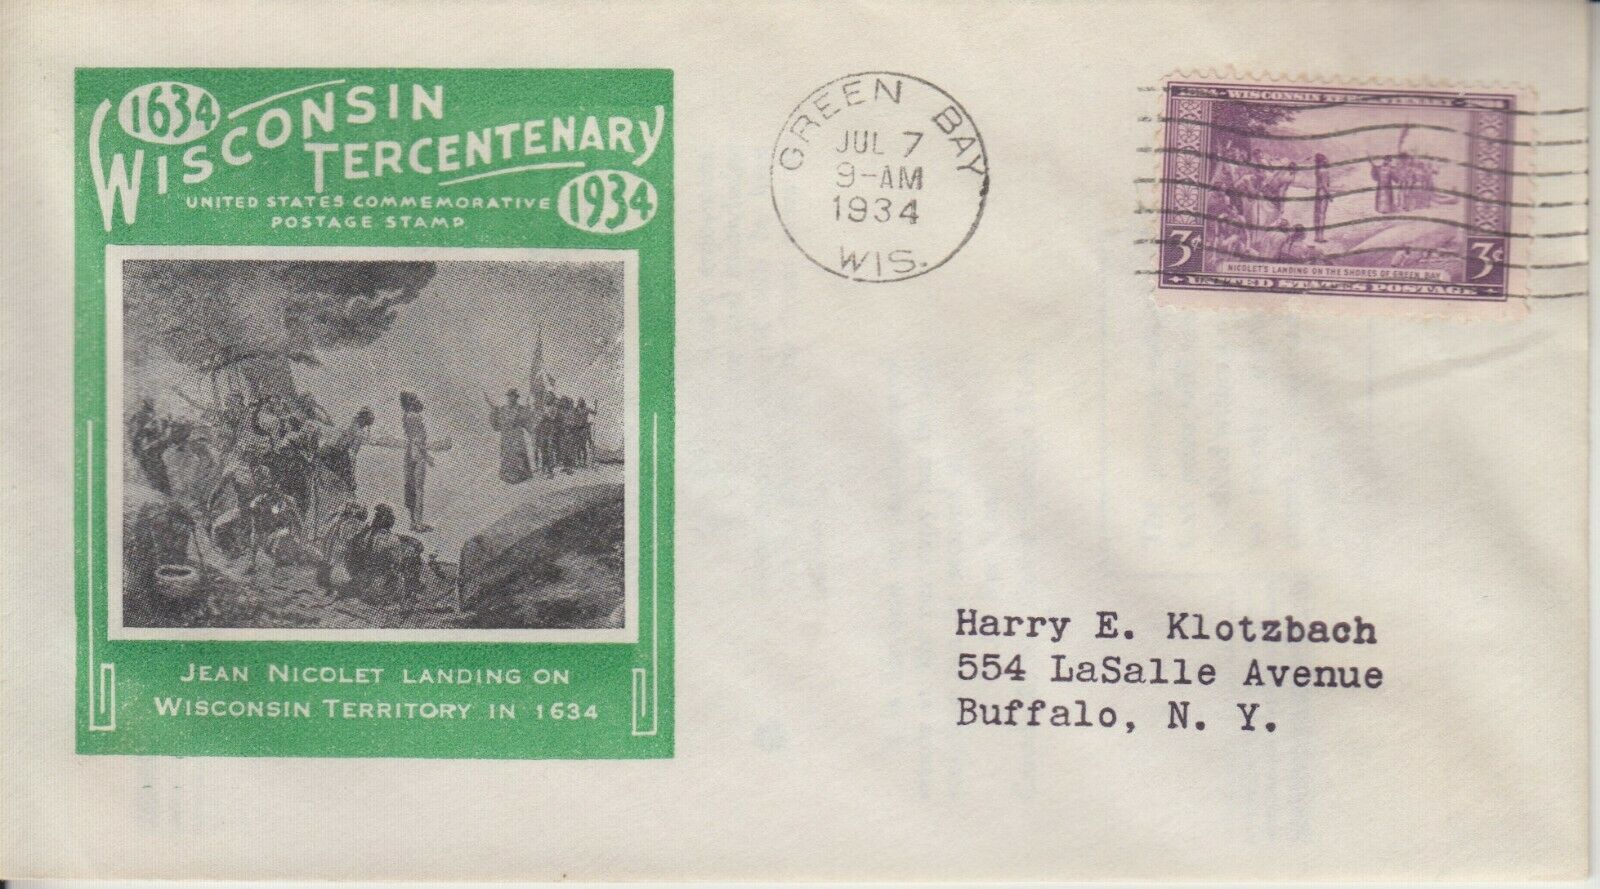 1934 #739 Wisconsin Fdc Ioor Cachet In Green Serviced By Klotzbach